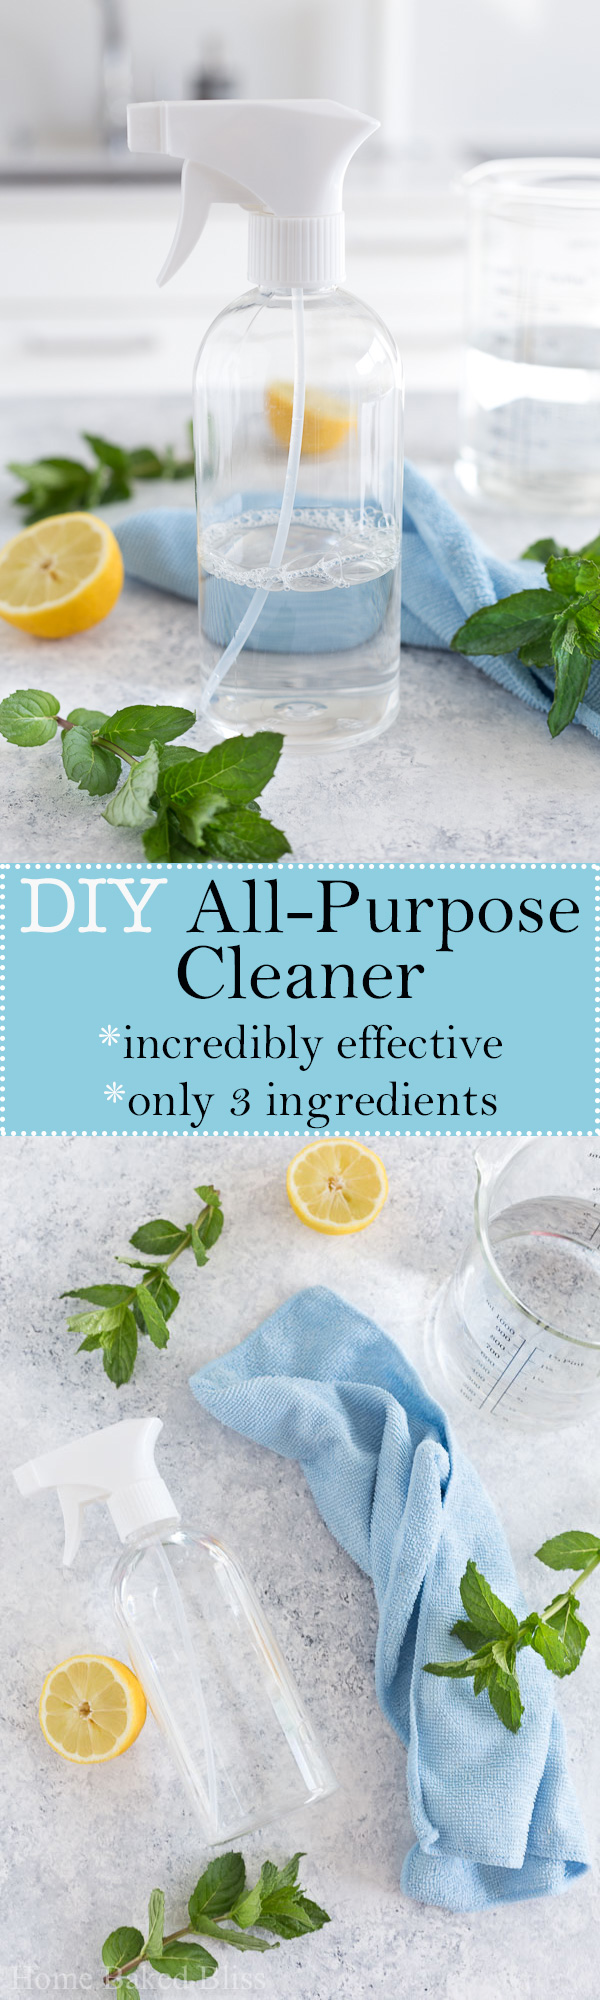 This diy all-purpose cleaner removes even the toughest water stains, dirt and grim! Get the 3 ingredient recipe.